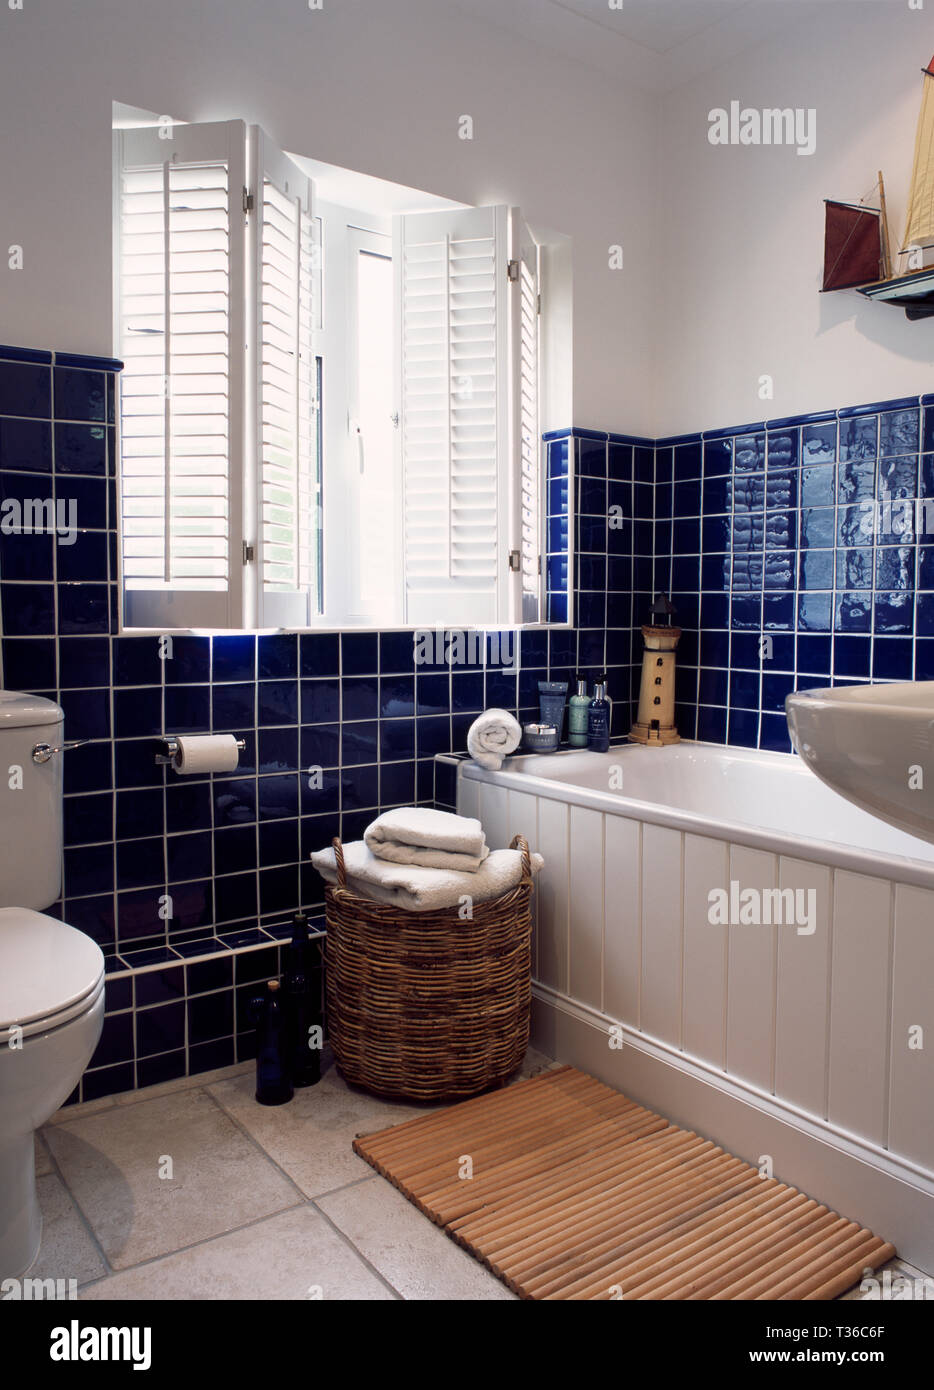 White plantation shutters in bathroom with blue tiling Stock Photo